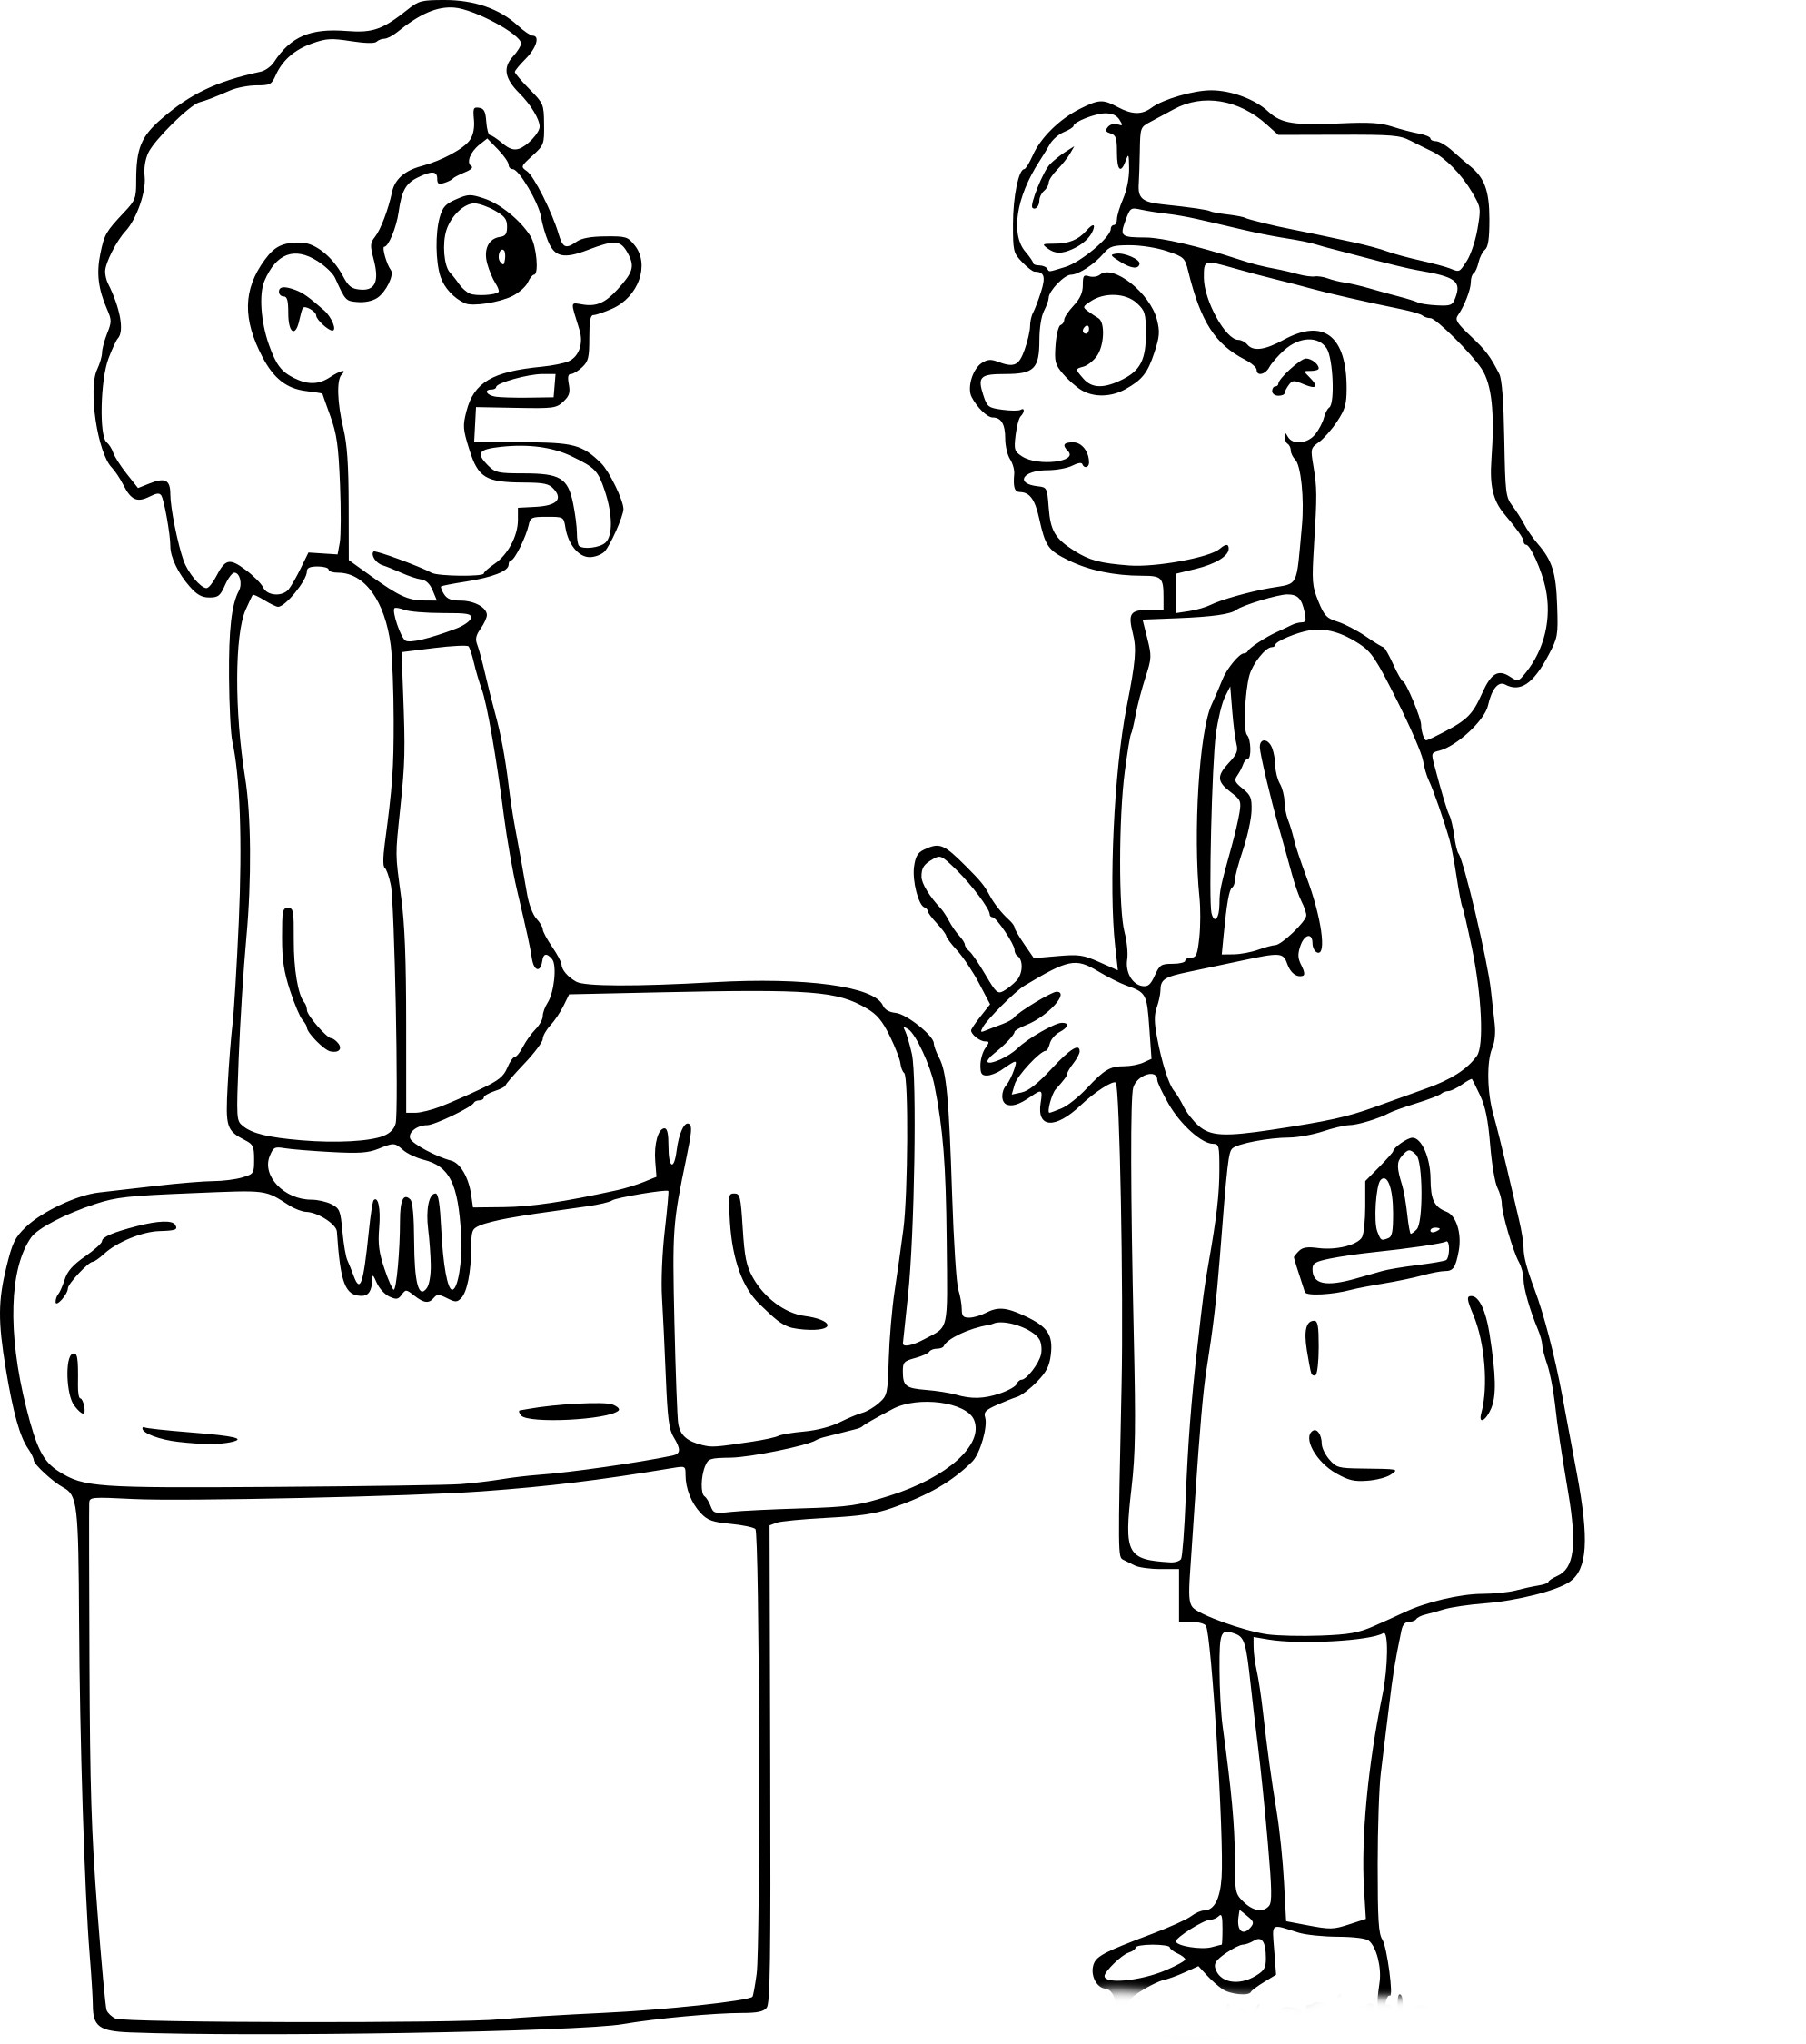 Doctor coloring page